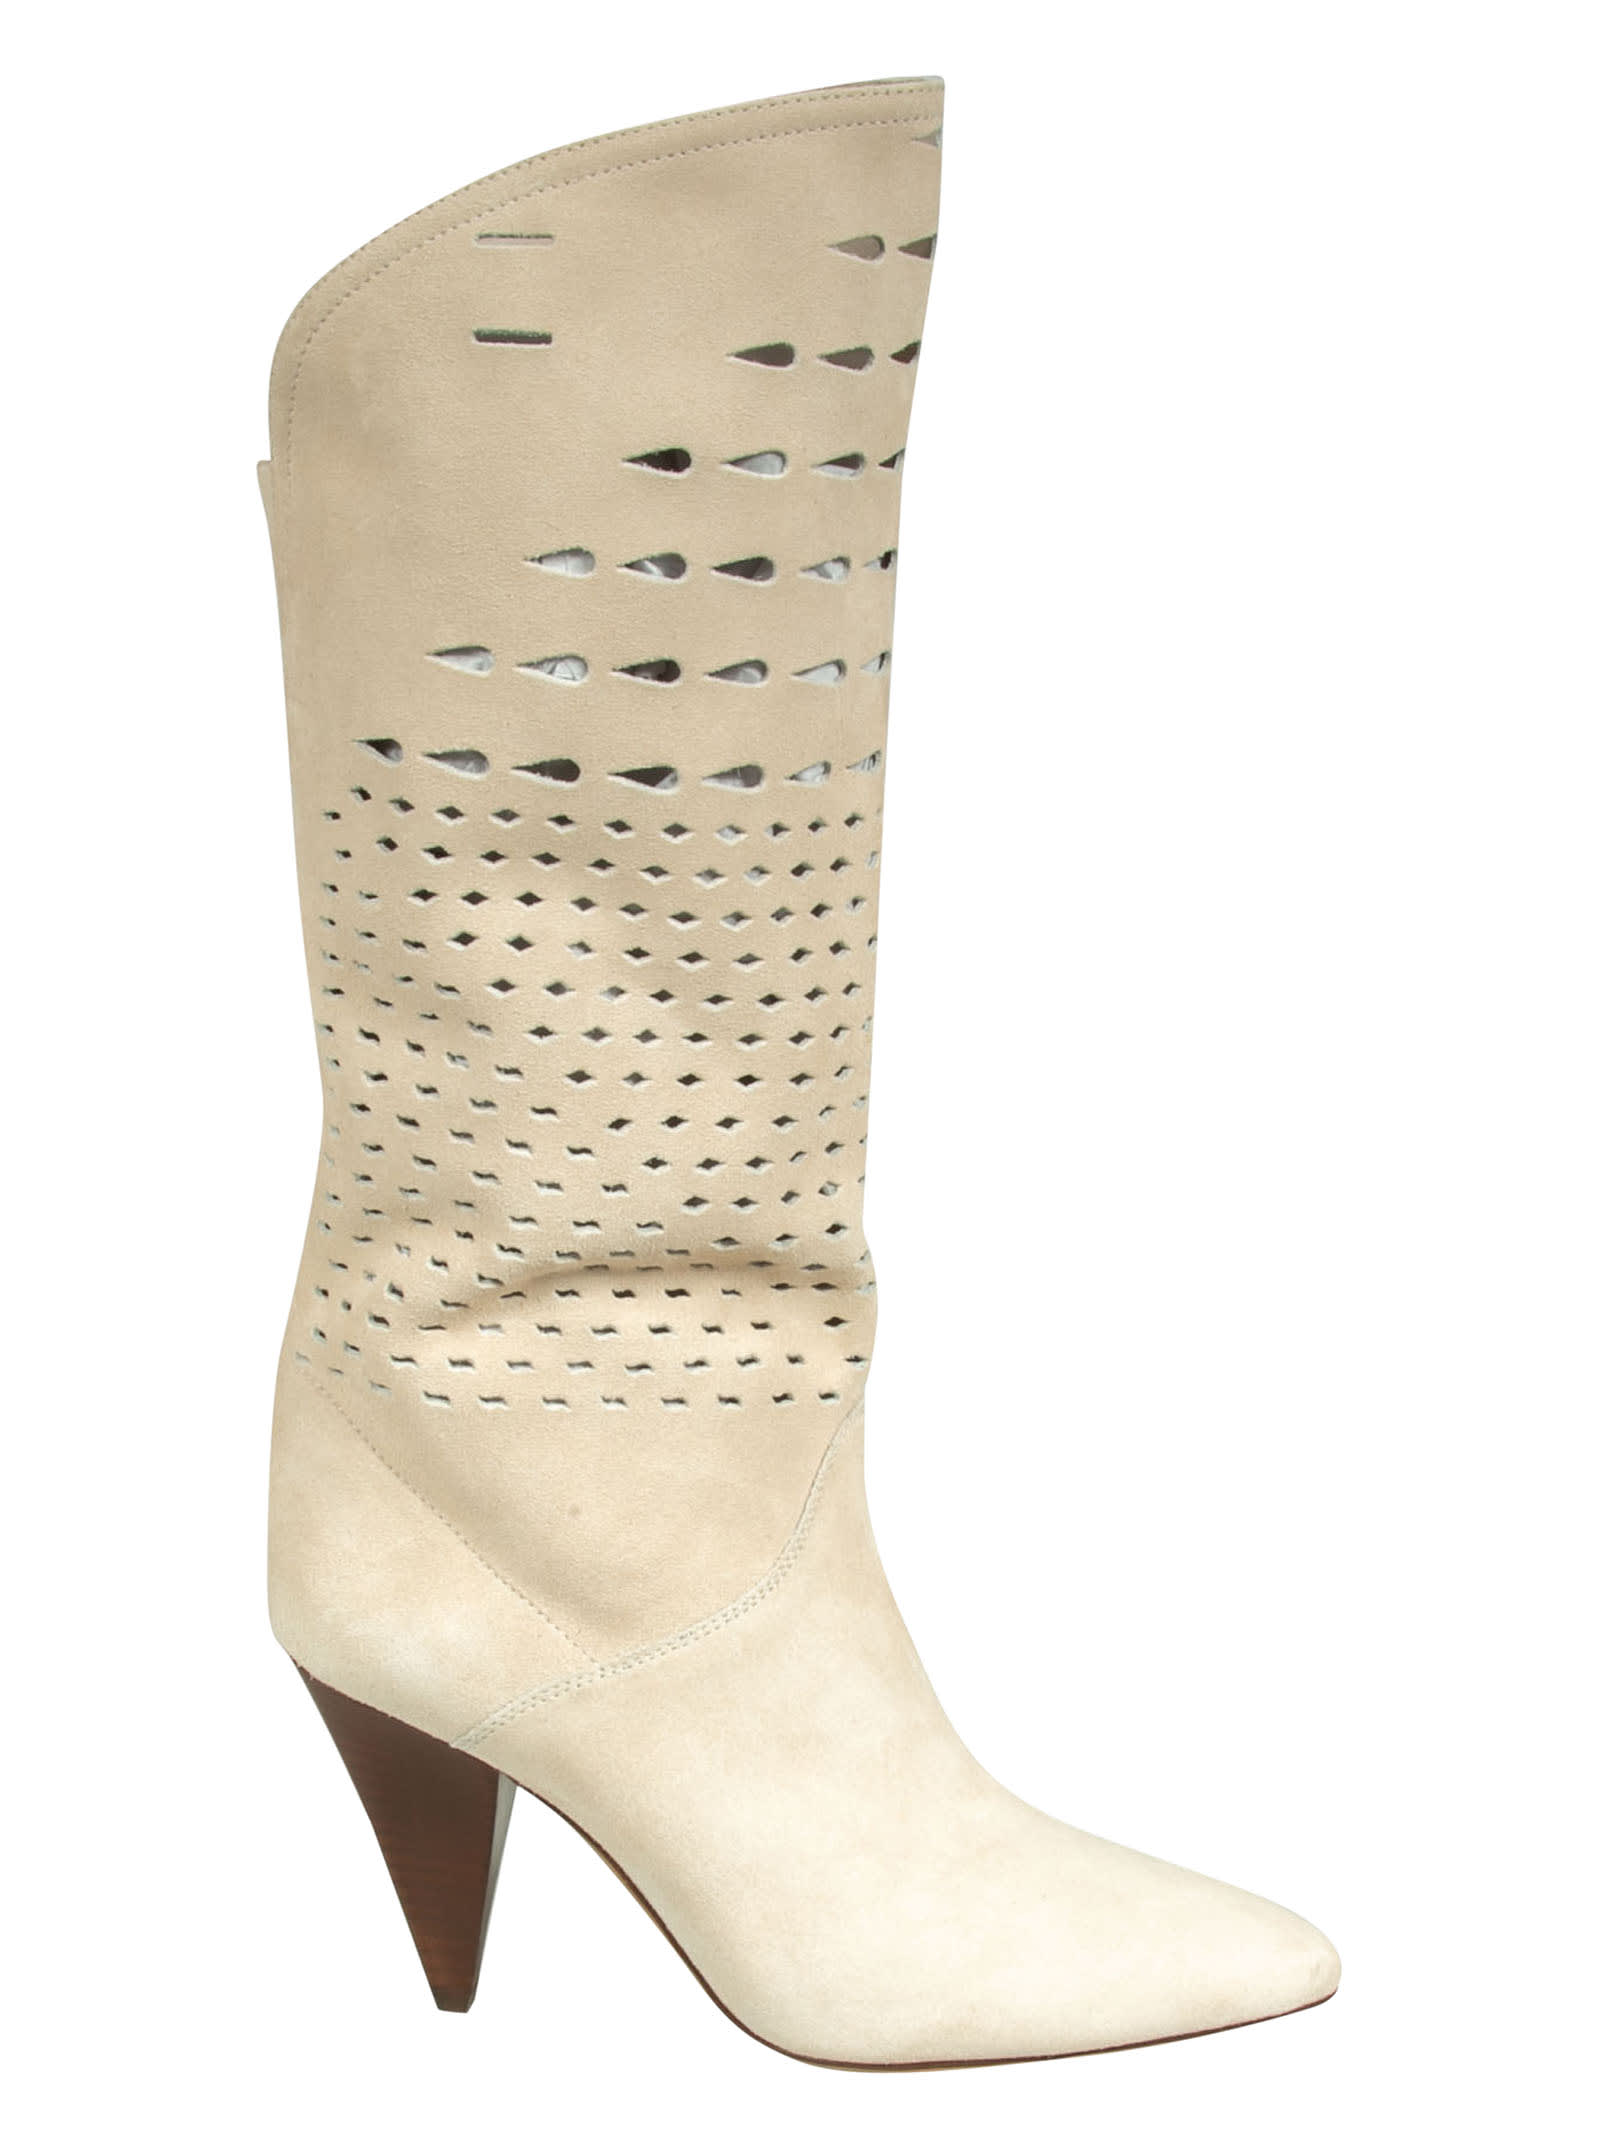 Isabel Marant Perforated Boots